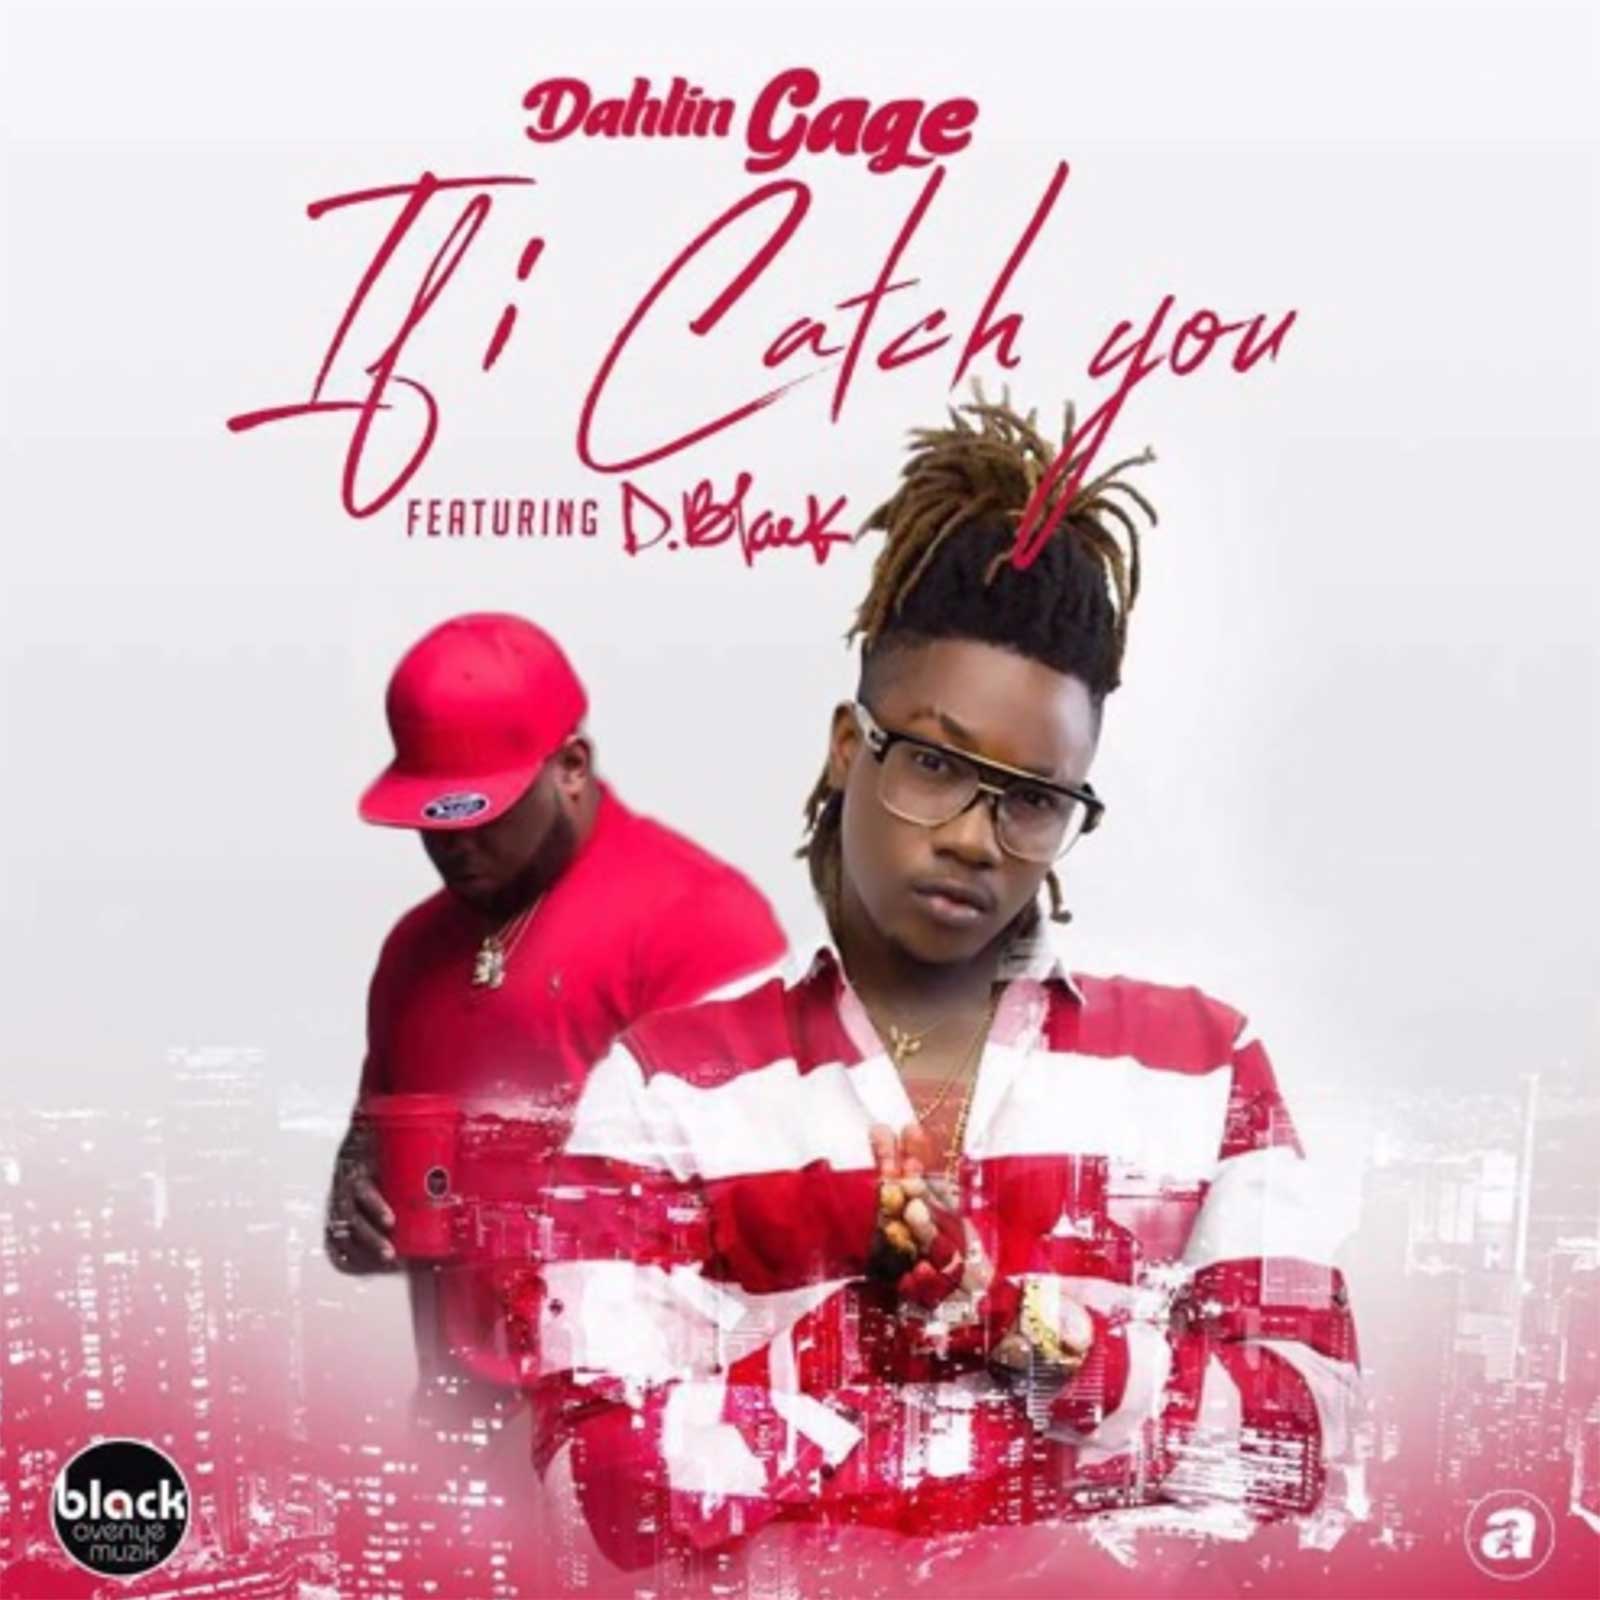 If I Catch You by Dahlin Gage feat. D-Black